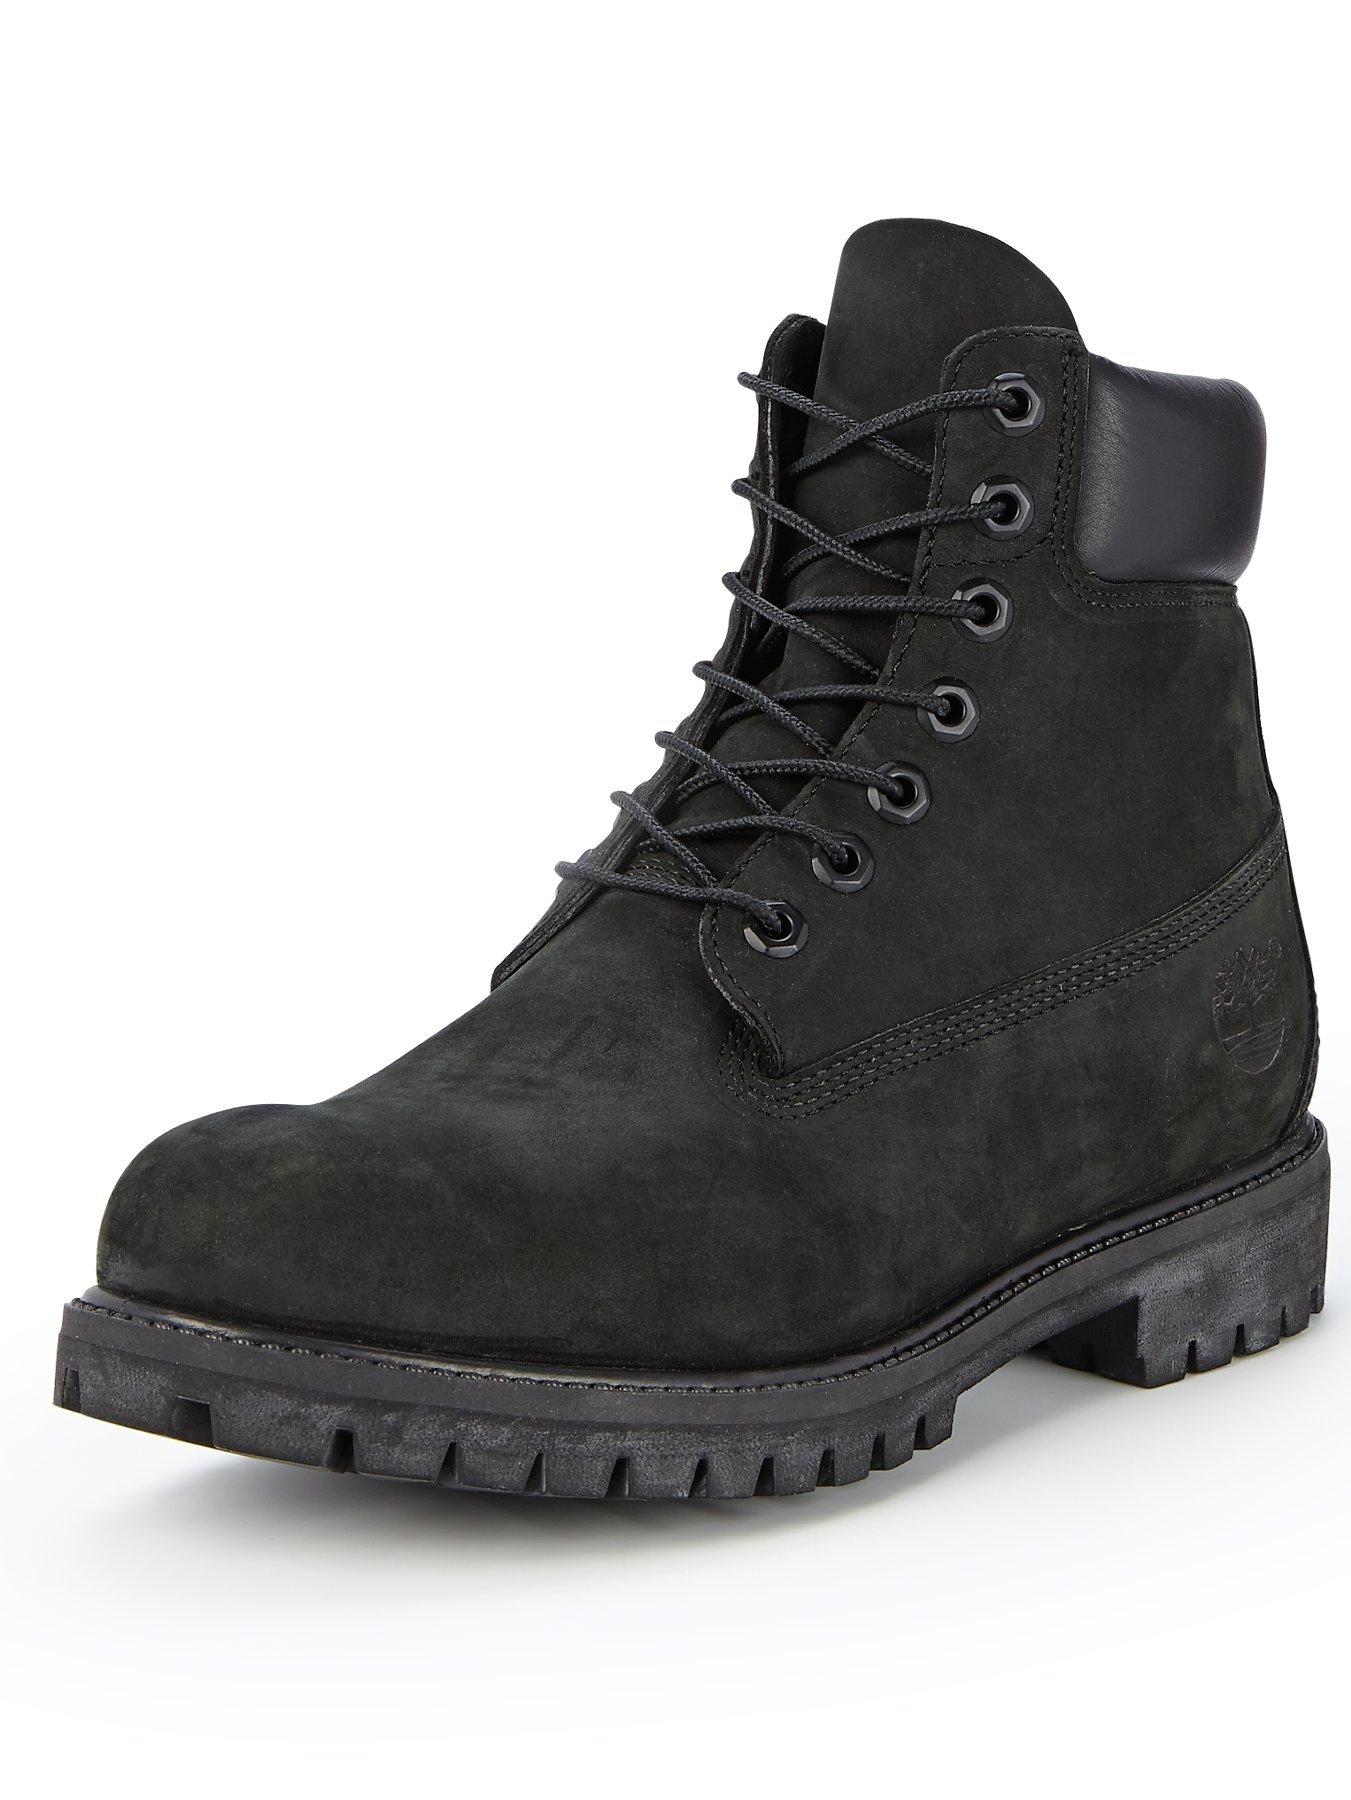 timberland mens slim boots black suede